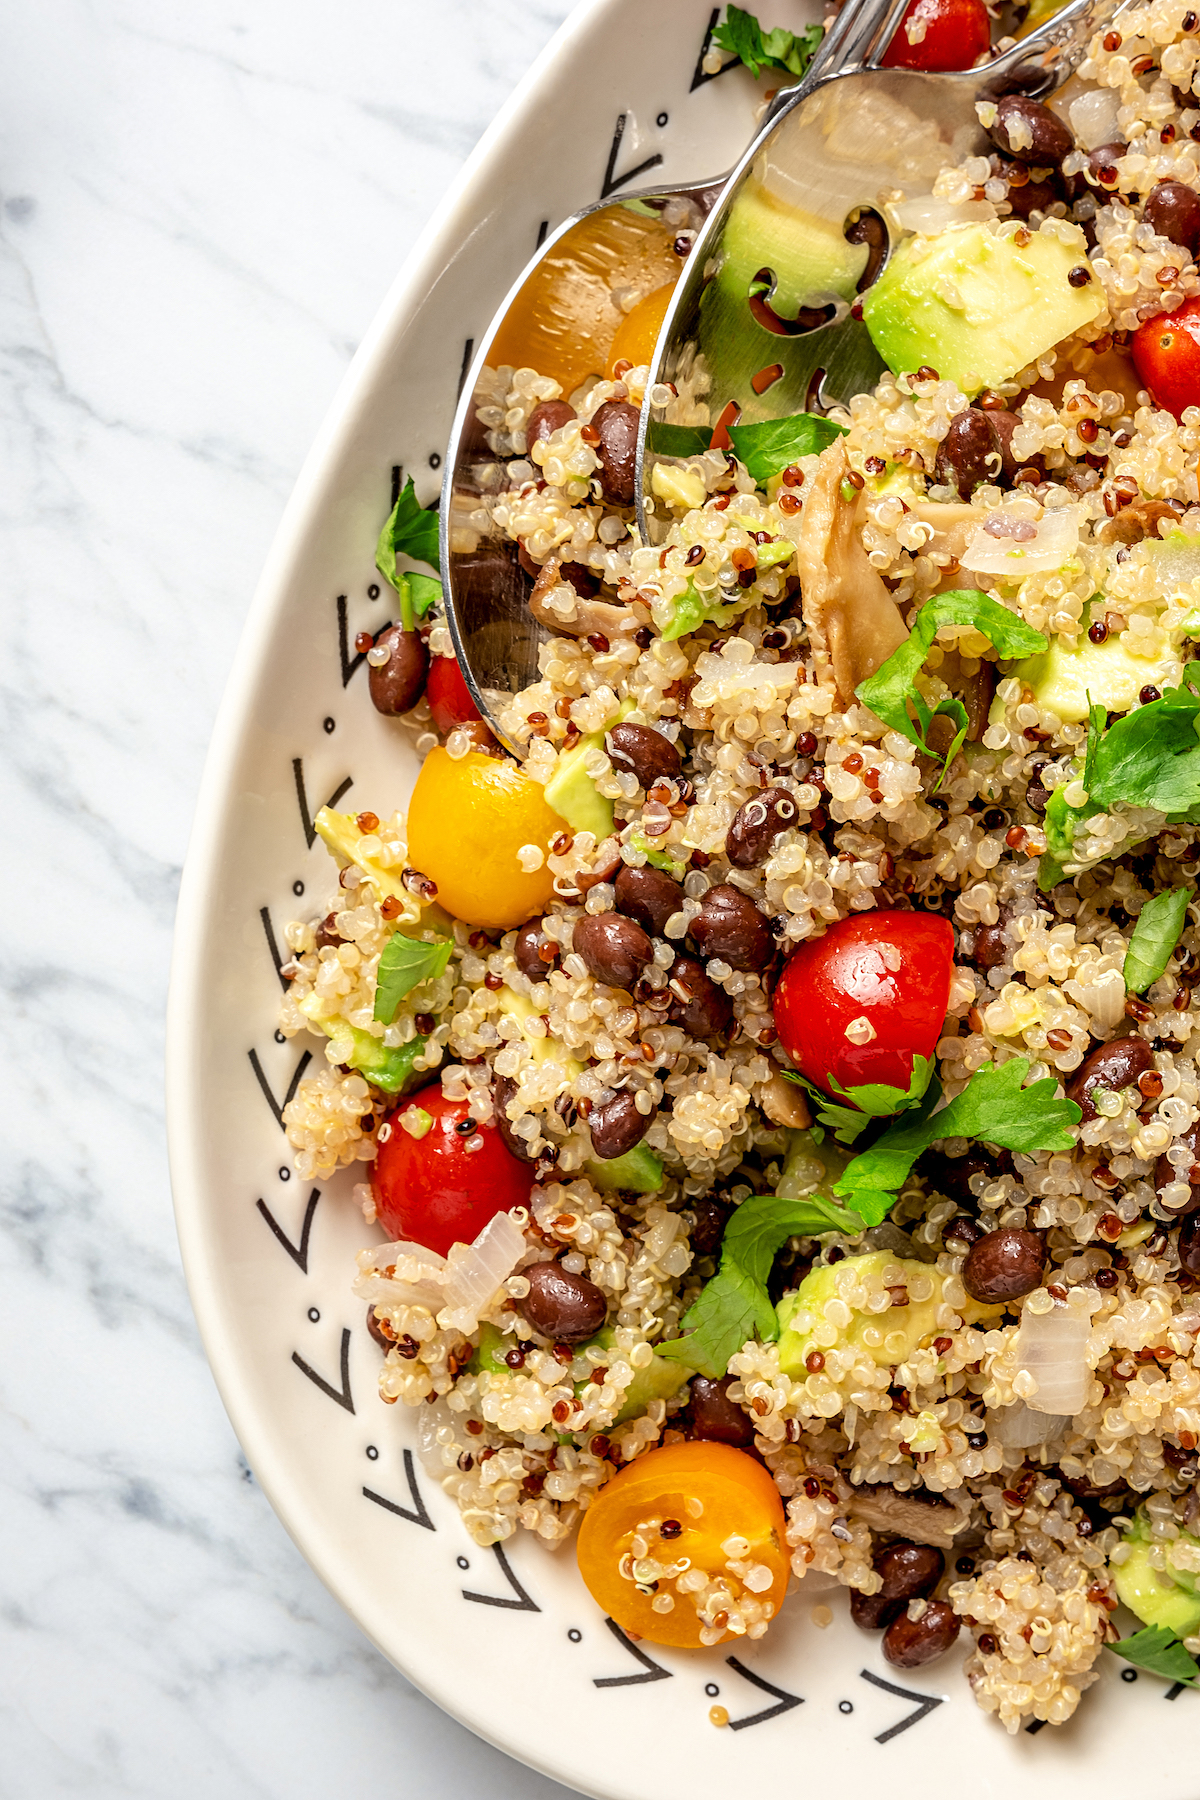 Close-up shot of quinoa salad, showing the texture of the ingredients.